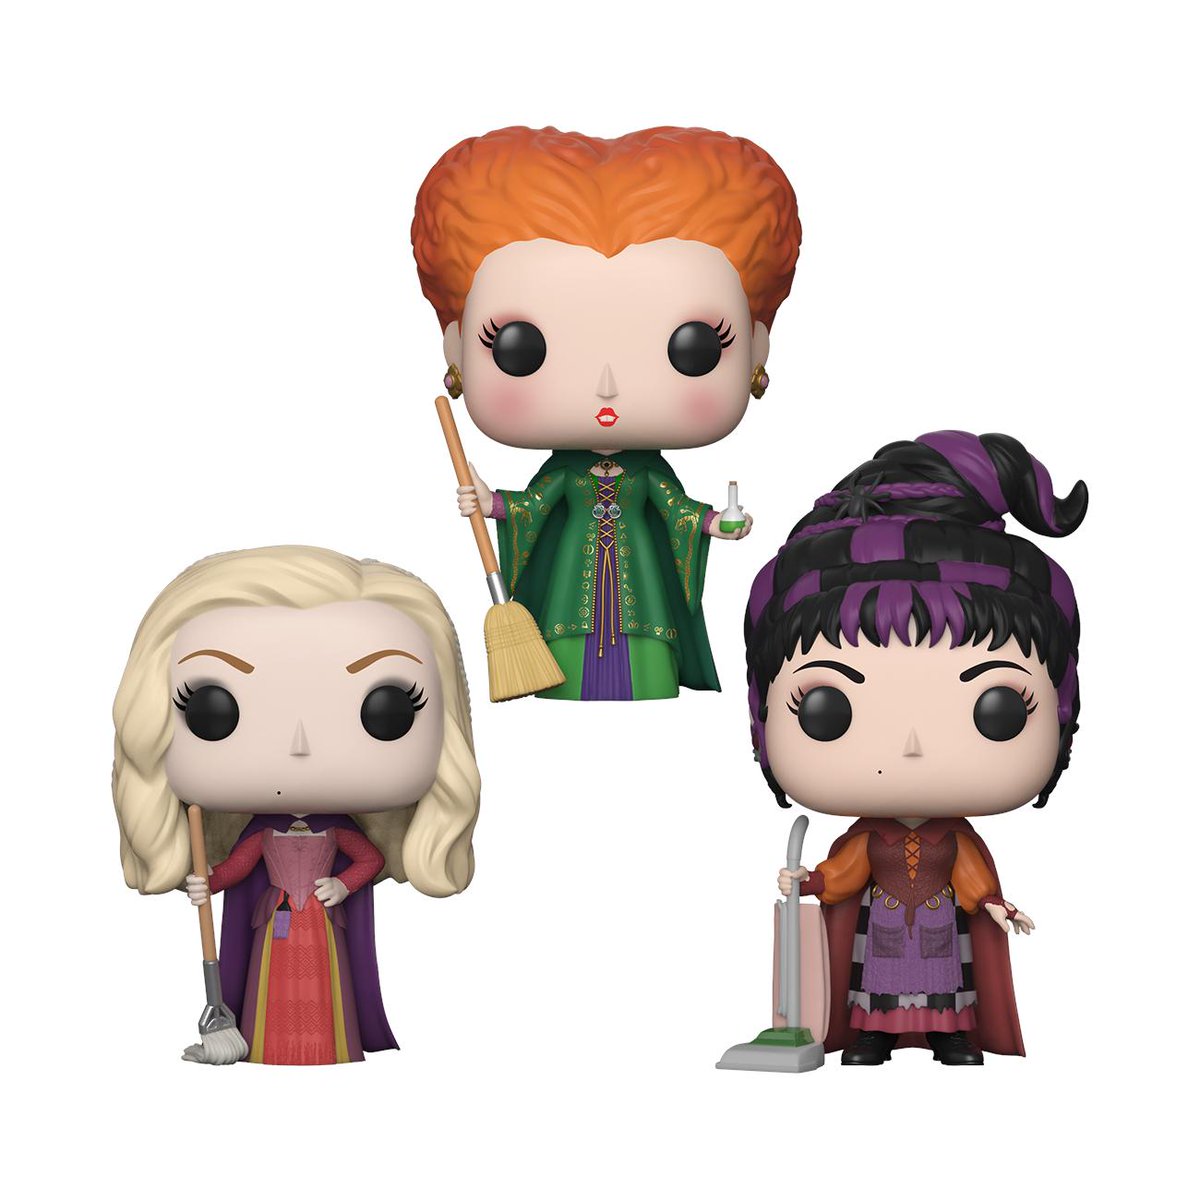 Happy October 🎃! 
RT & follow @OriginalFunko for a chance to WIN a @SpiritHalloween exclusive Pop! 3-Pack of The Sanderson Sisters! 
#Funko #Pop #Exclusive #Disney #HocusPocus